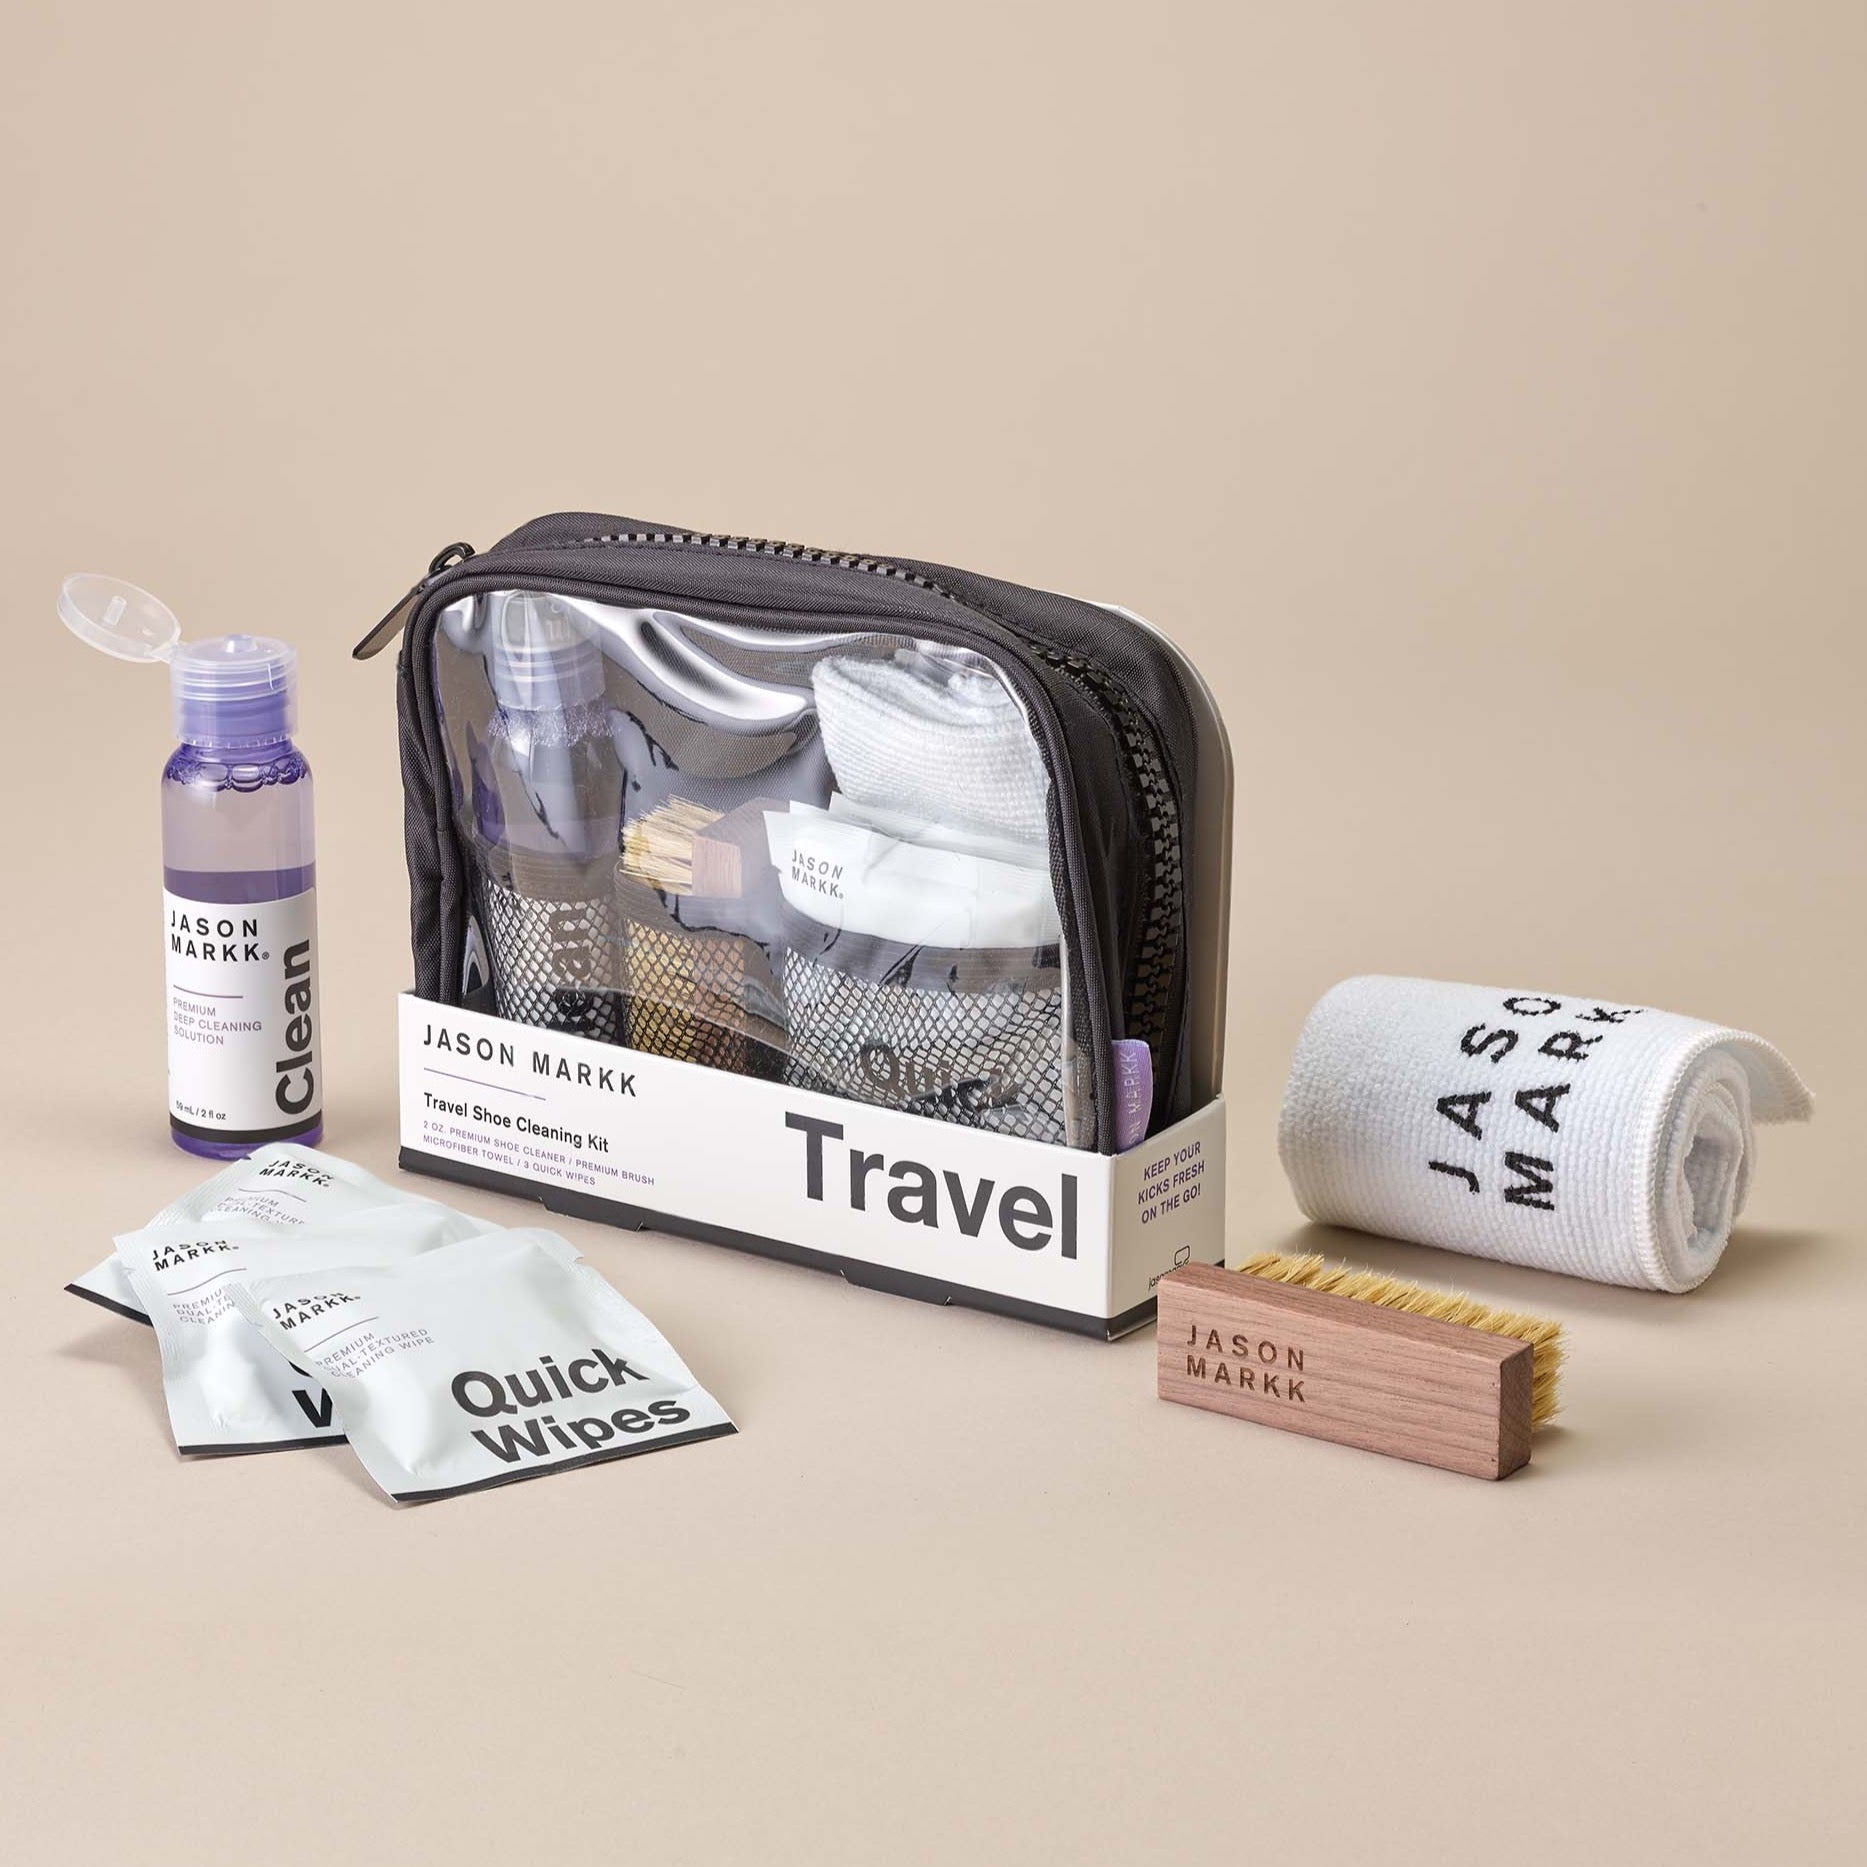 travel care kit in packaging that includes black zipper pouch. items in kit are quick wipes, brush, microfiber towel, and cleaning solution 